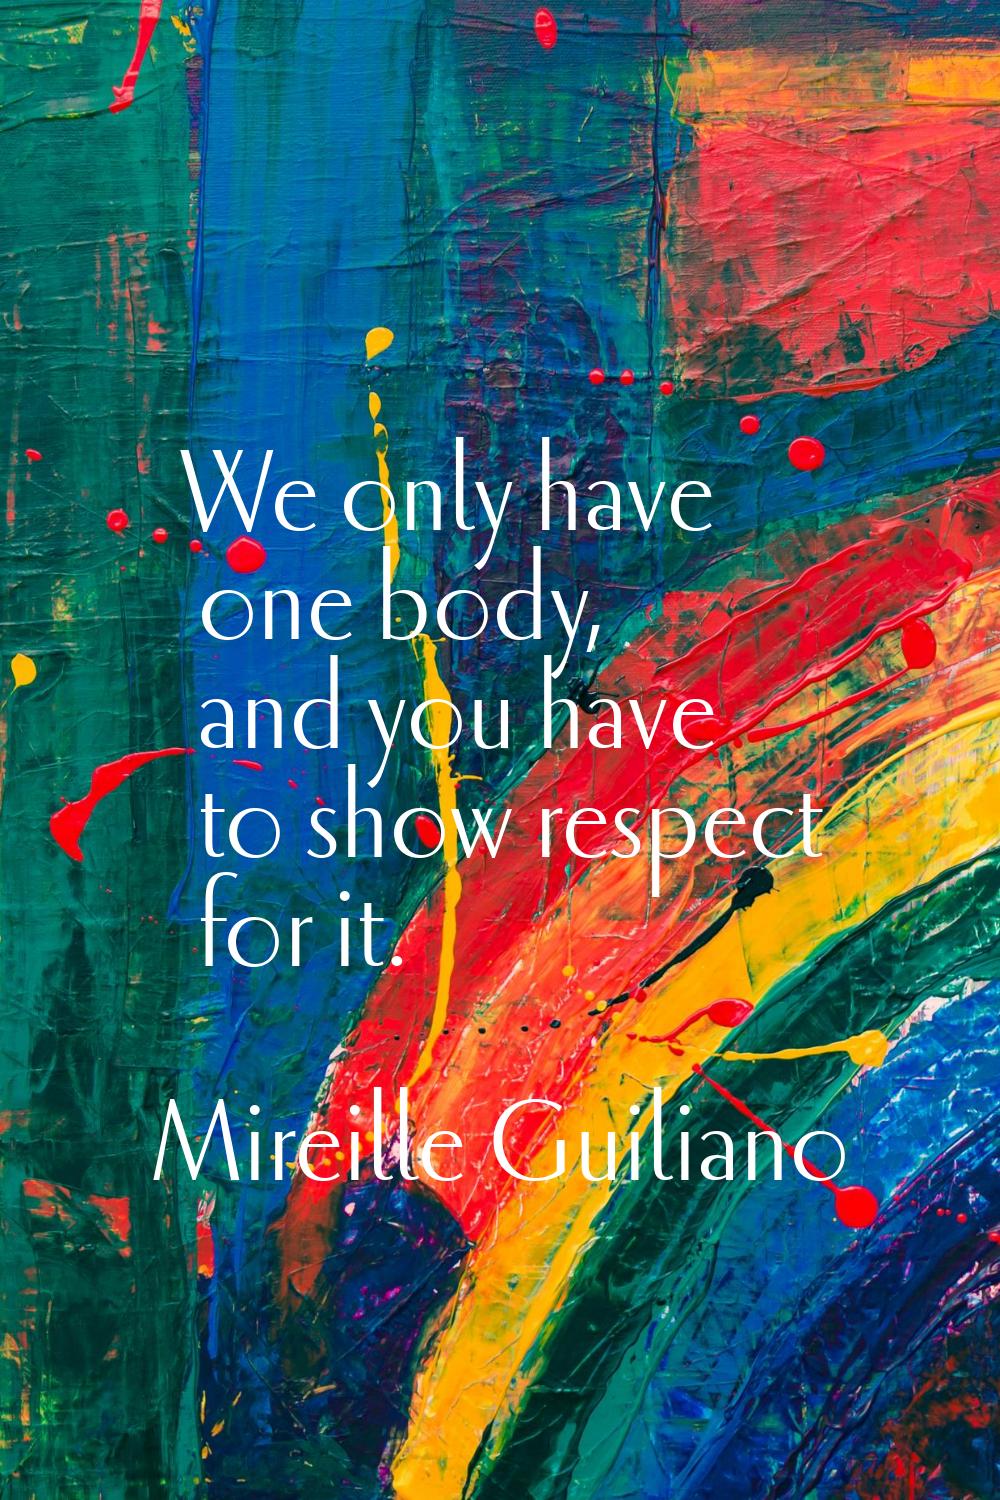 We only have one body, and you have to show respect for it.